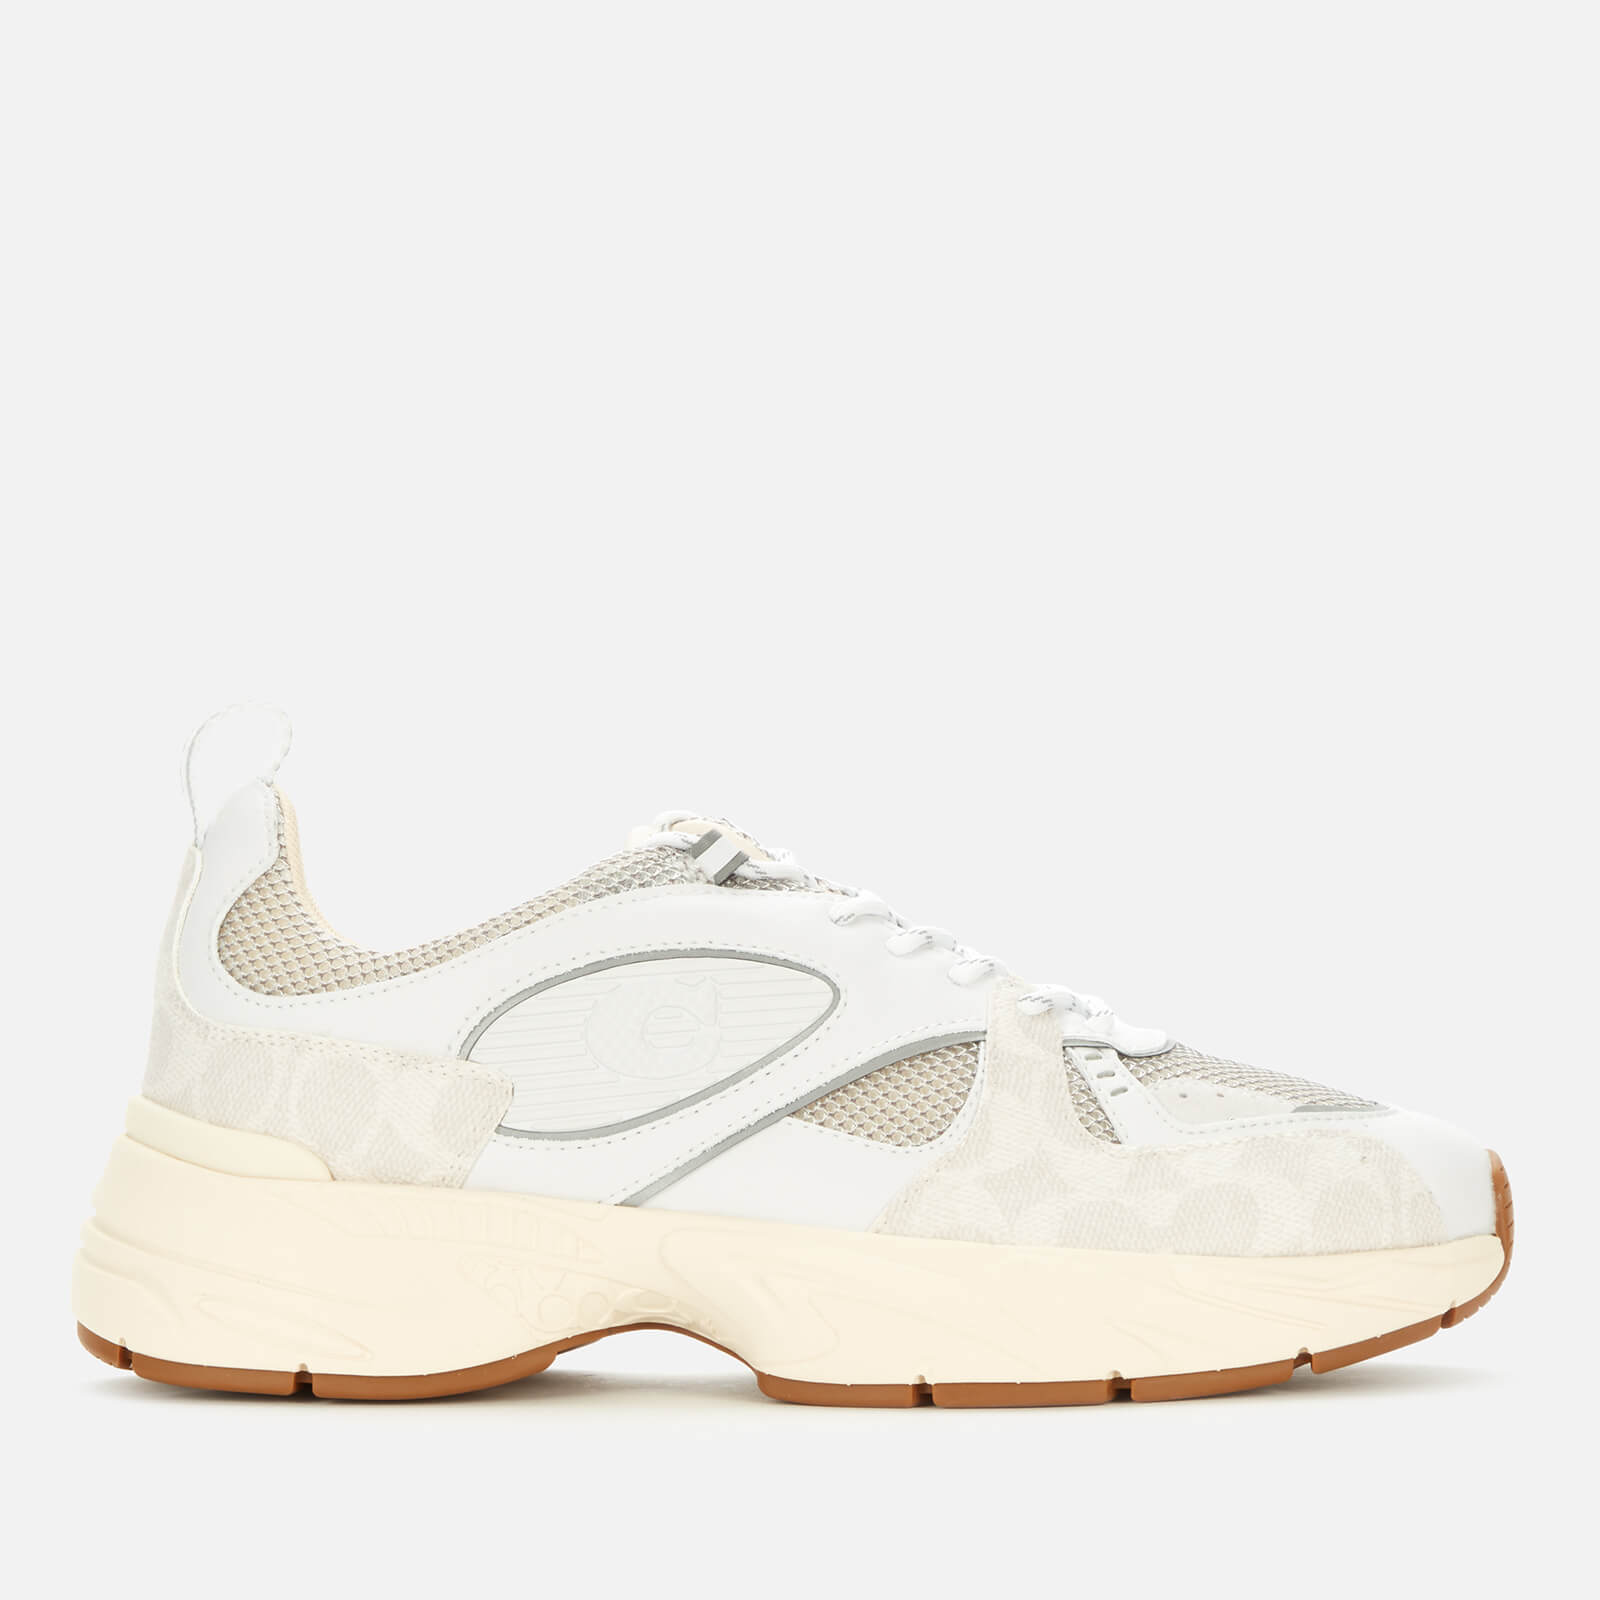 Coach Men’s Tech Running Style Trainers - Optic White